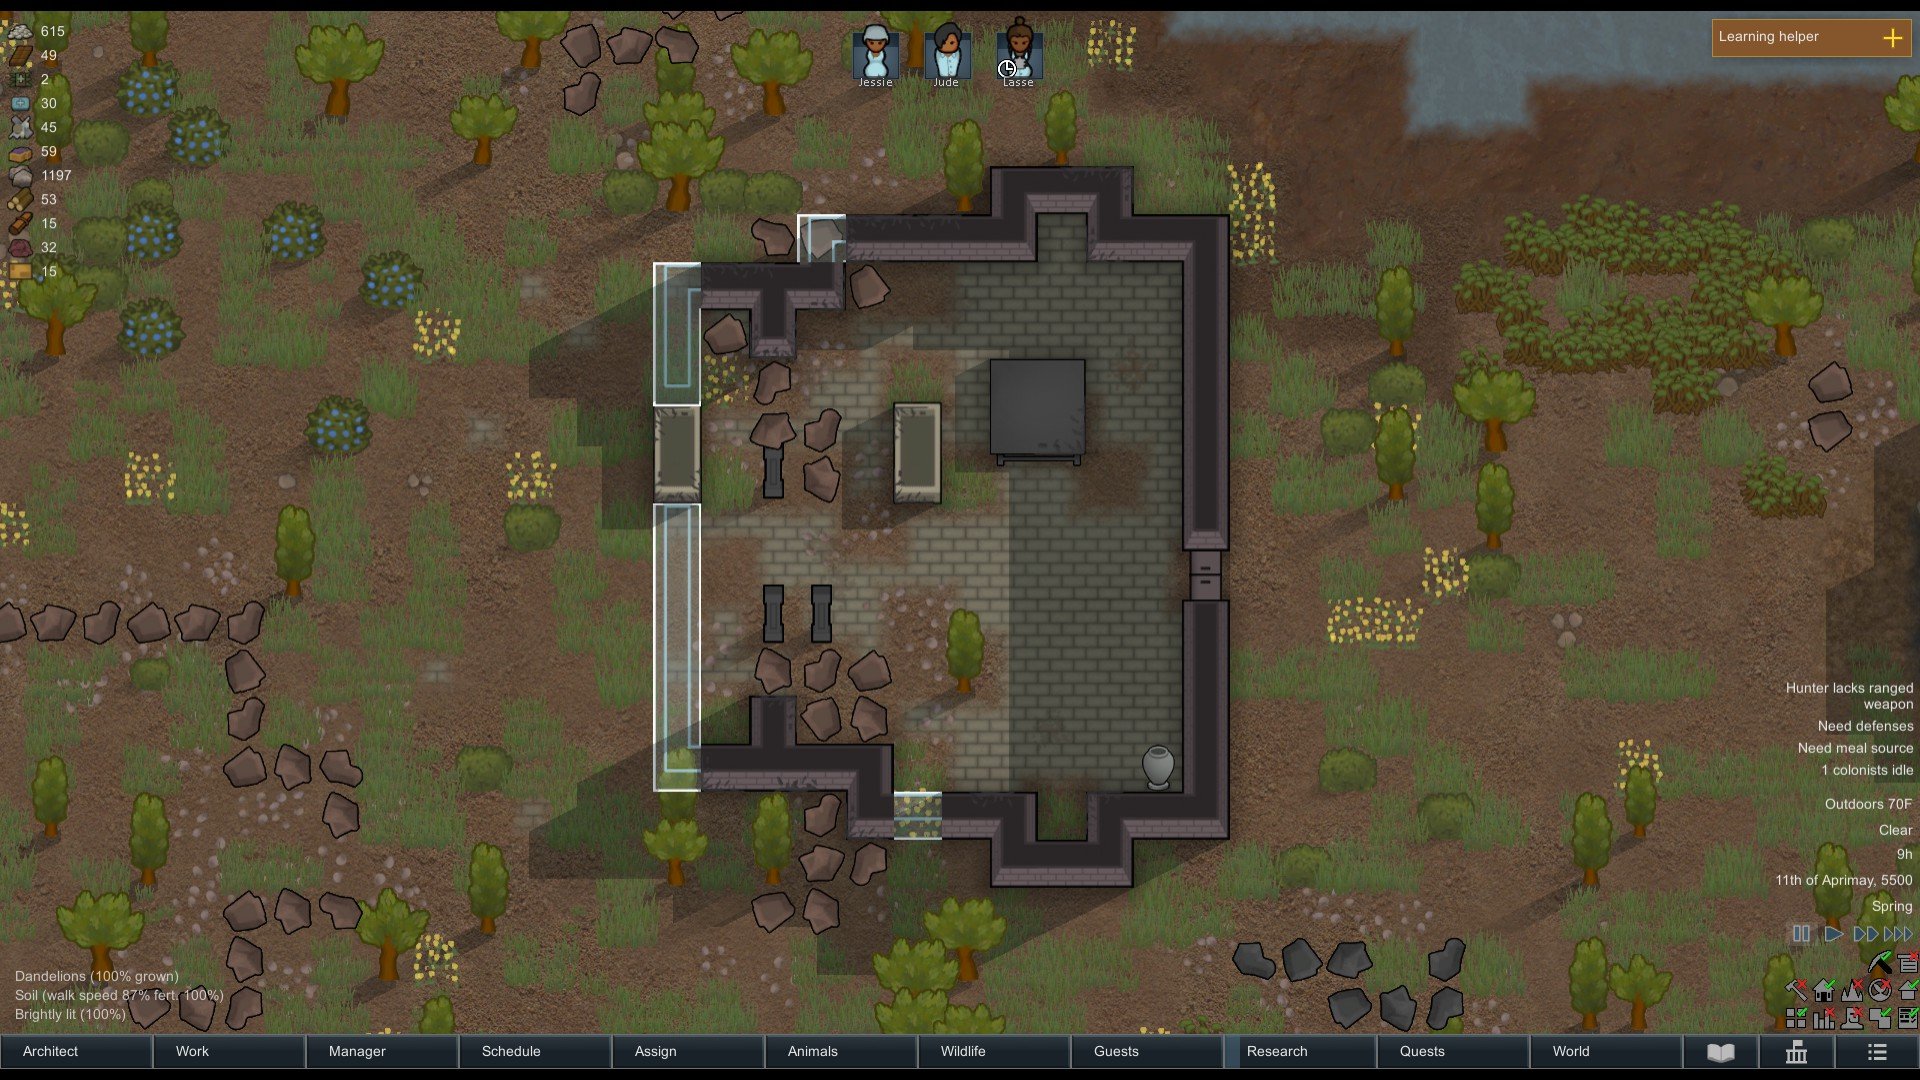 Rimworld Differnce Between Dining Room And Rec Room